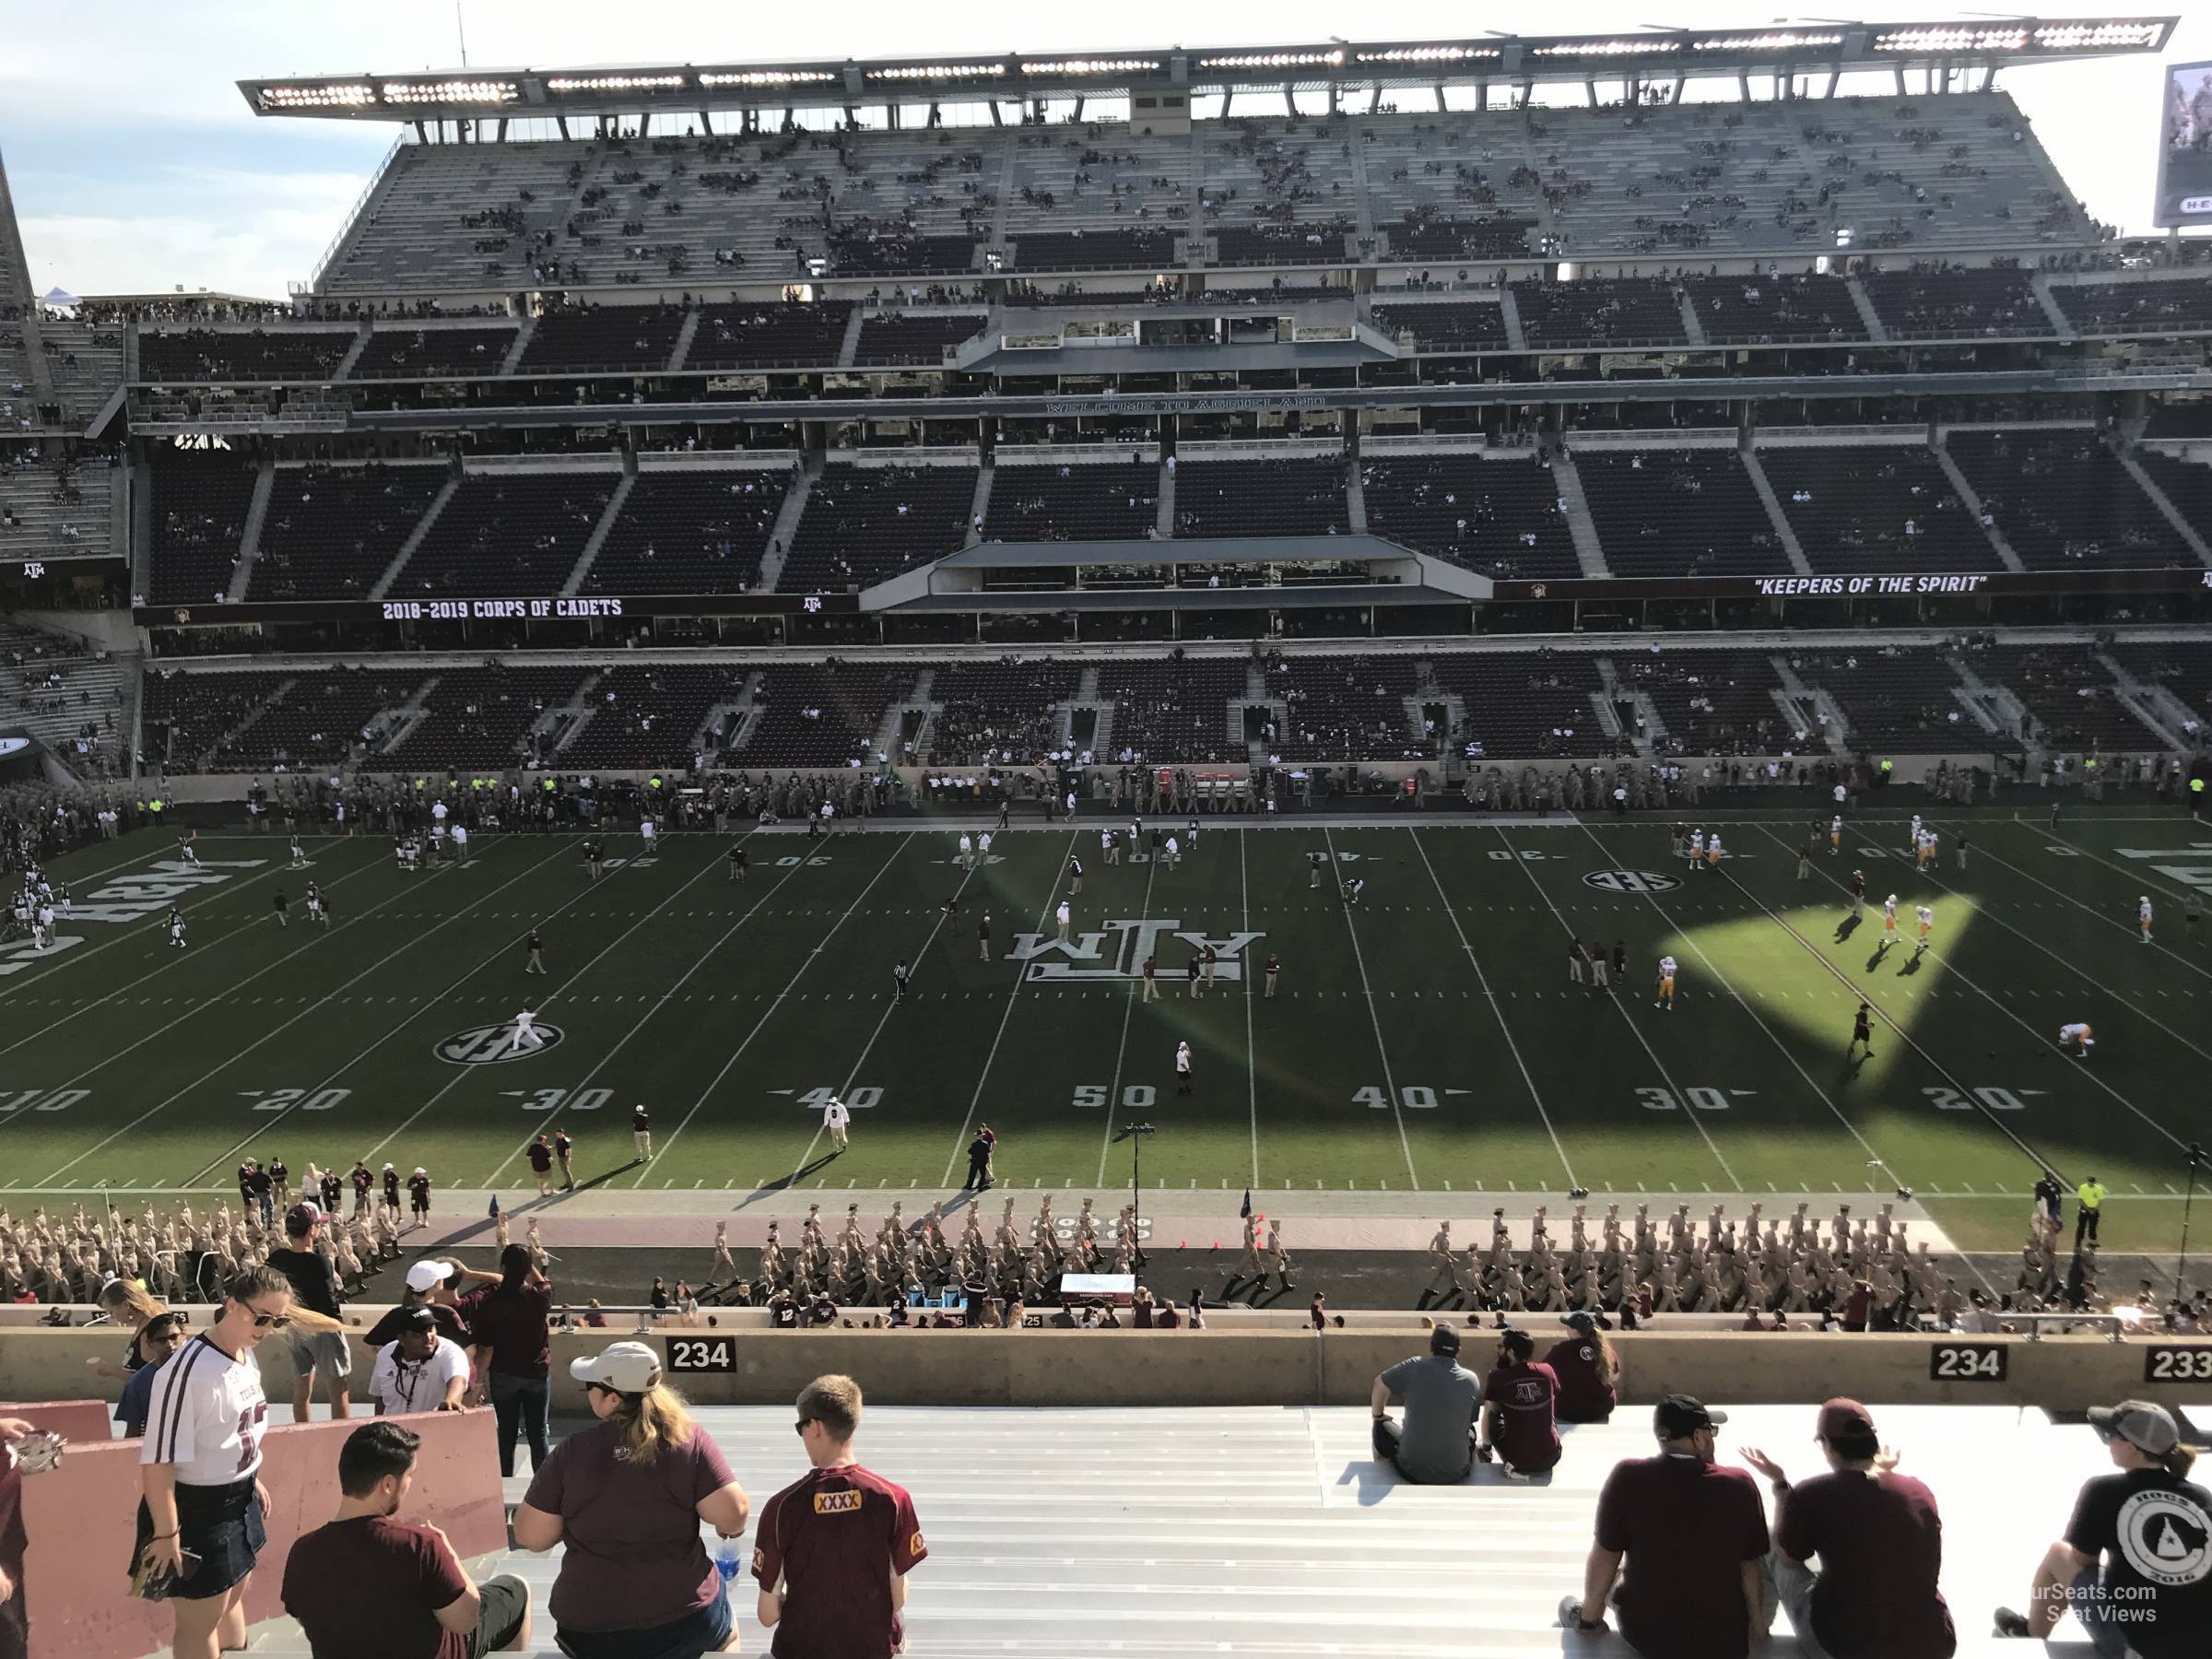 section 234, row 20 seat view  - kyle field